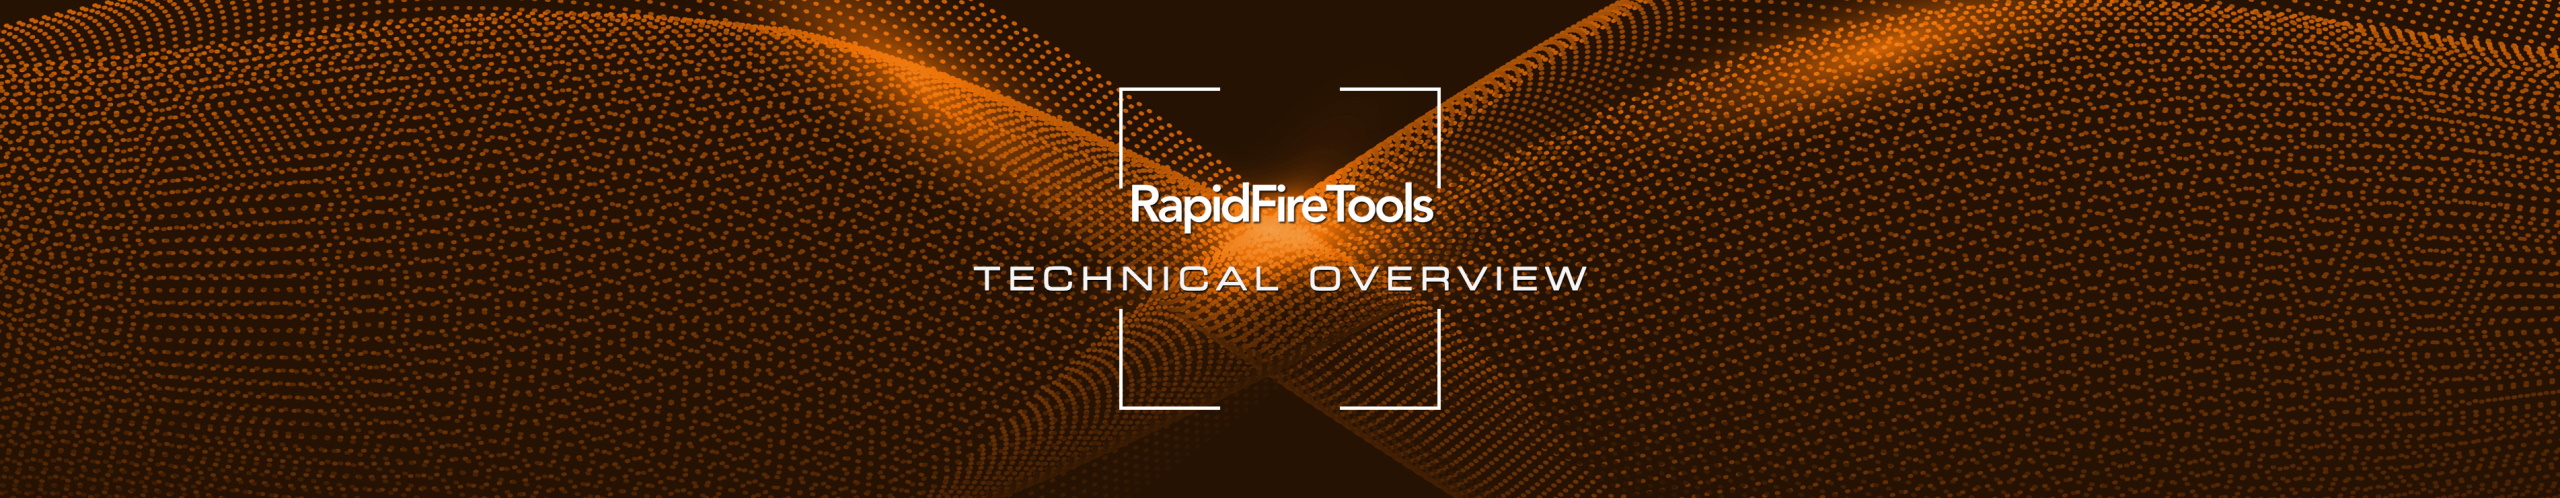 RapidFire Tools Technical Overview: